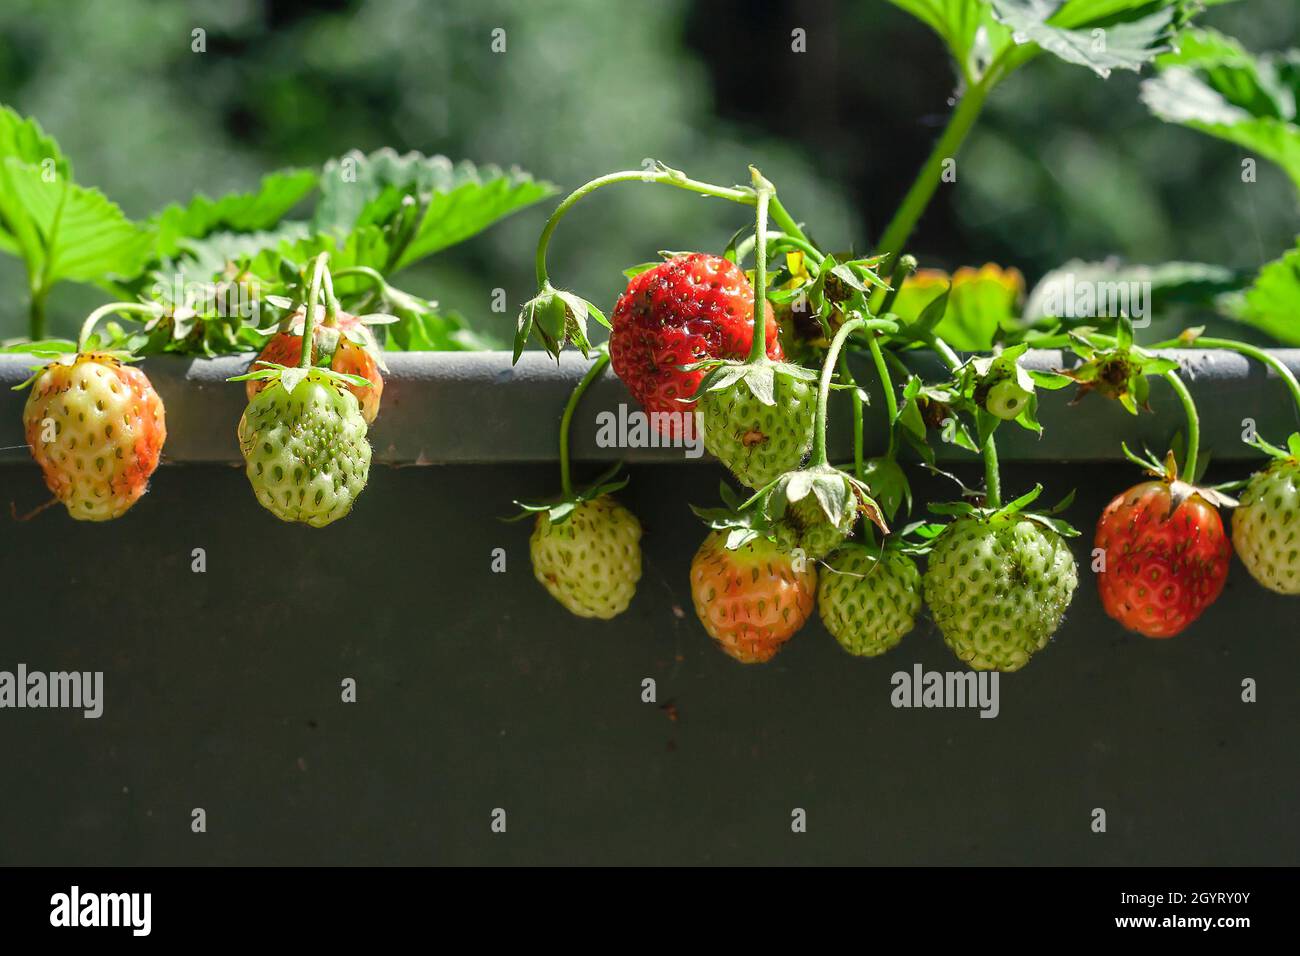 Potted strawberry plant Fragaria × ananassa on a planter with growing red and green fruits Stock Photo